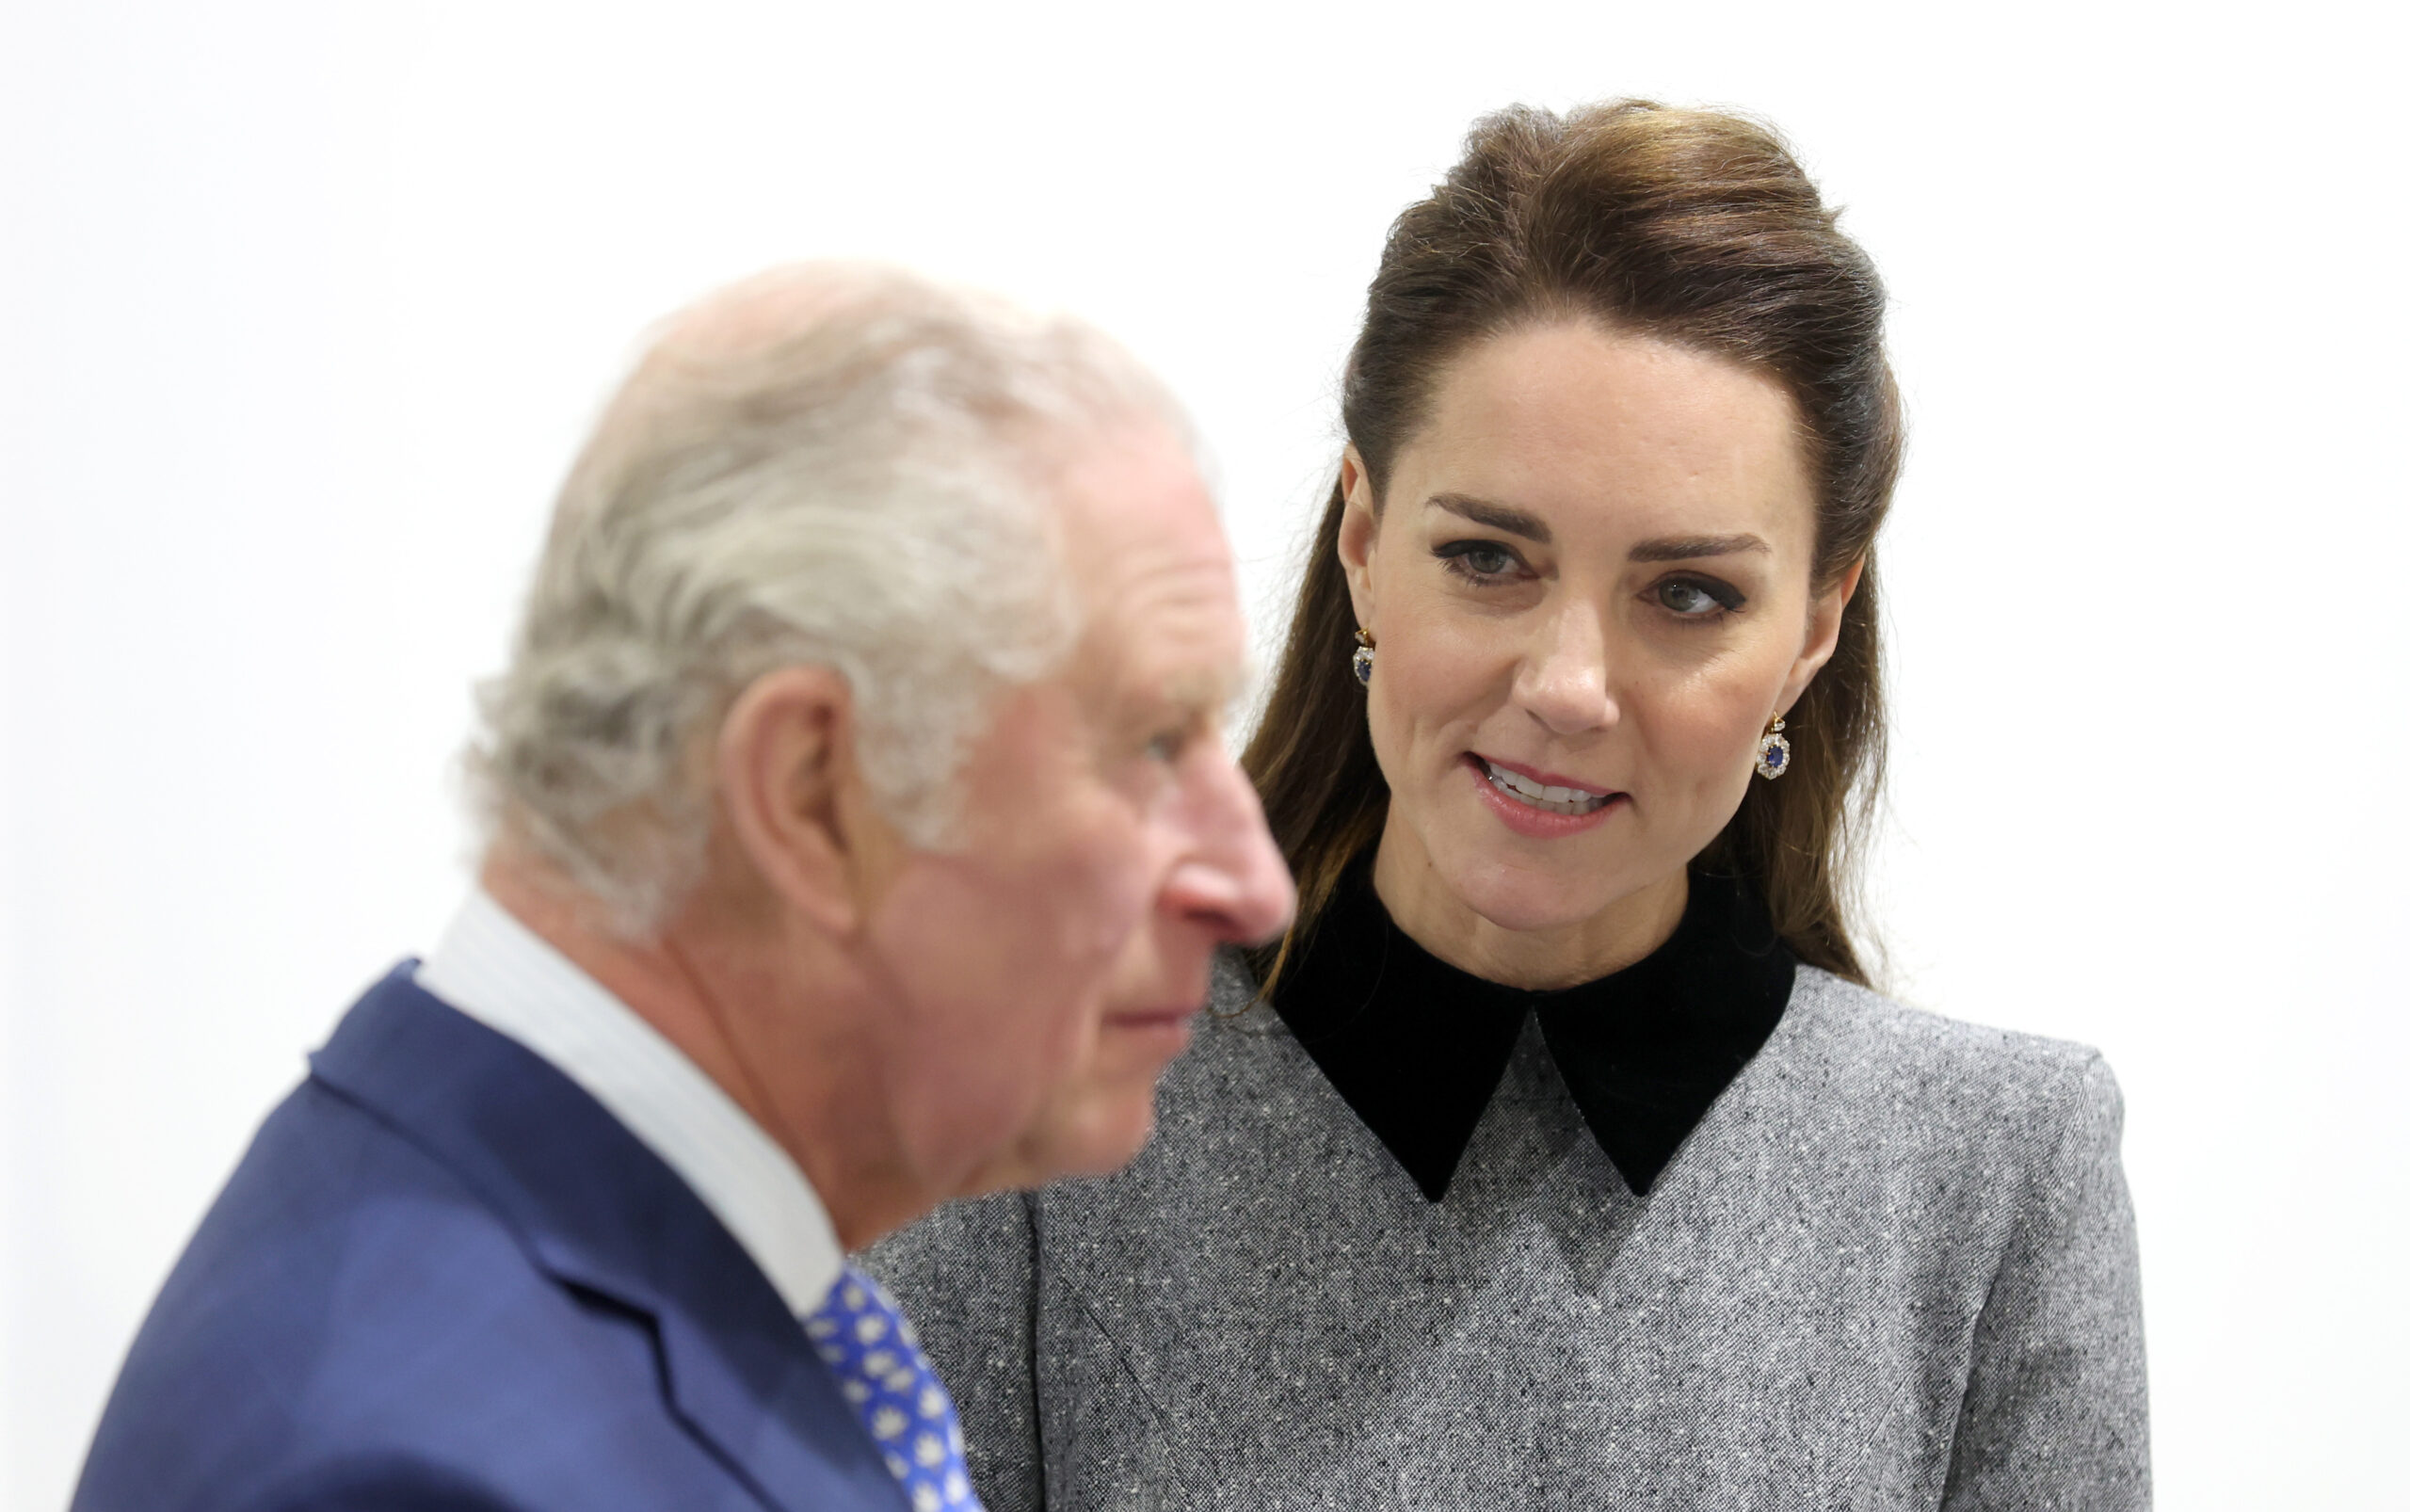 King Charles III and the Princess of Wales Kate Middleton during their visit to a training site for arts and culture in London, England on February 3, 2022. | Source: Getty Images